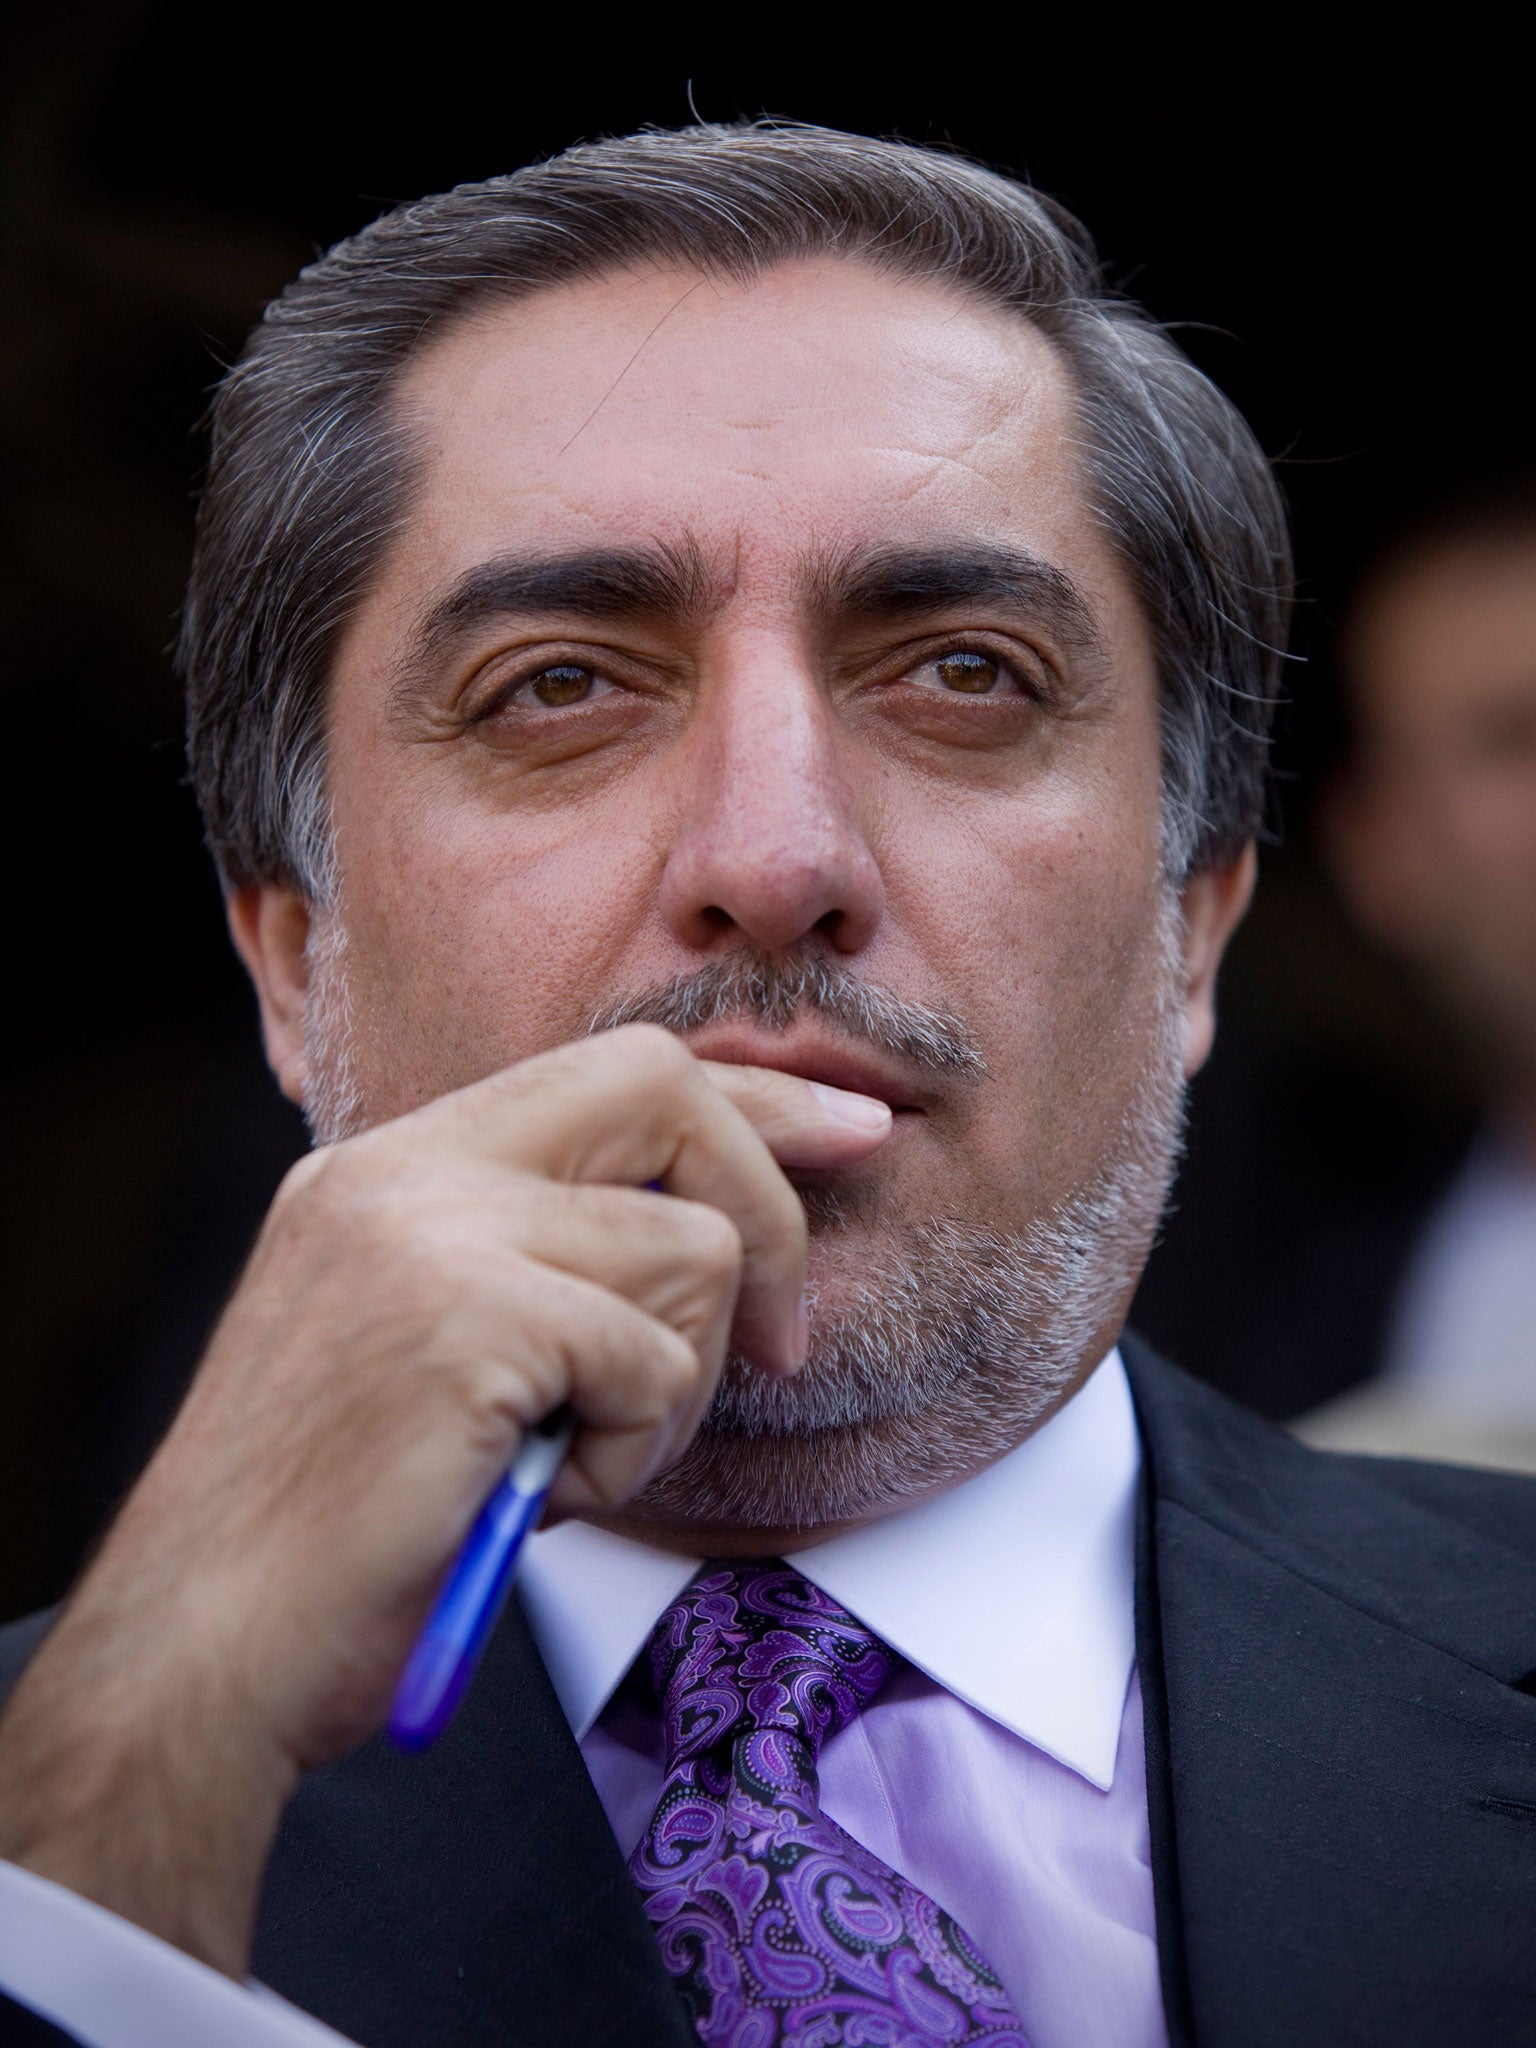 Dr Abdullah Abdullah is the former leader of the opposition